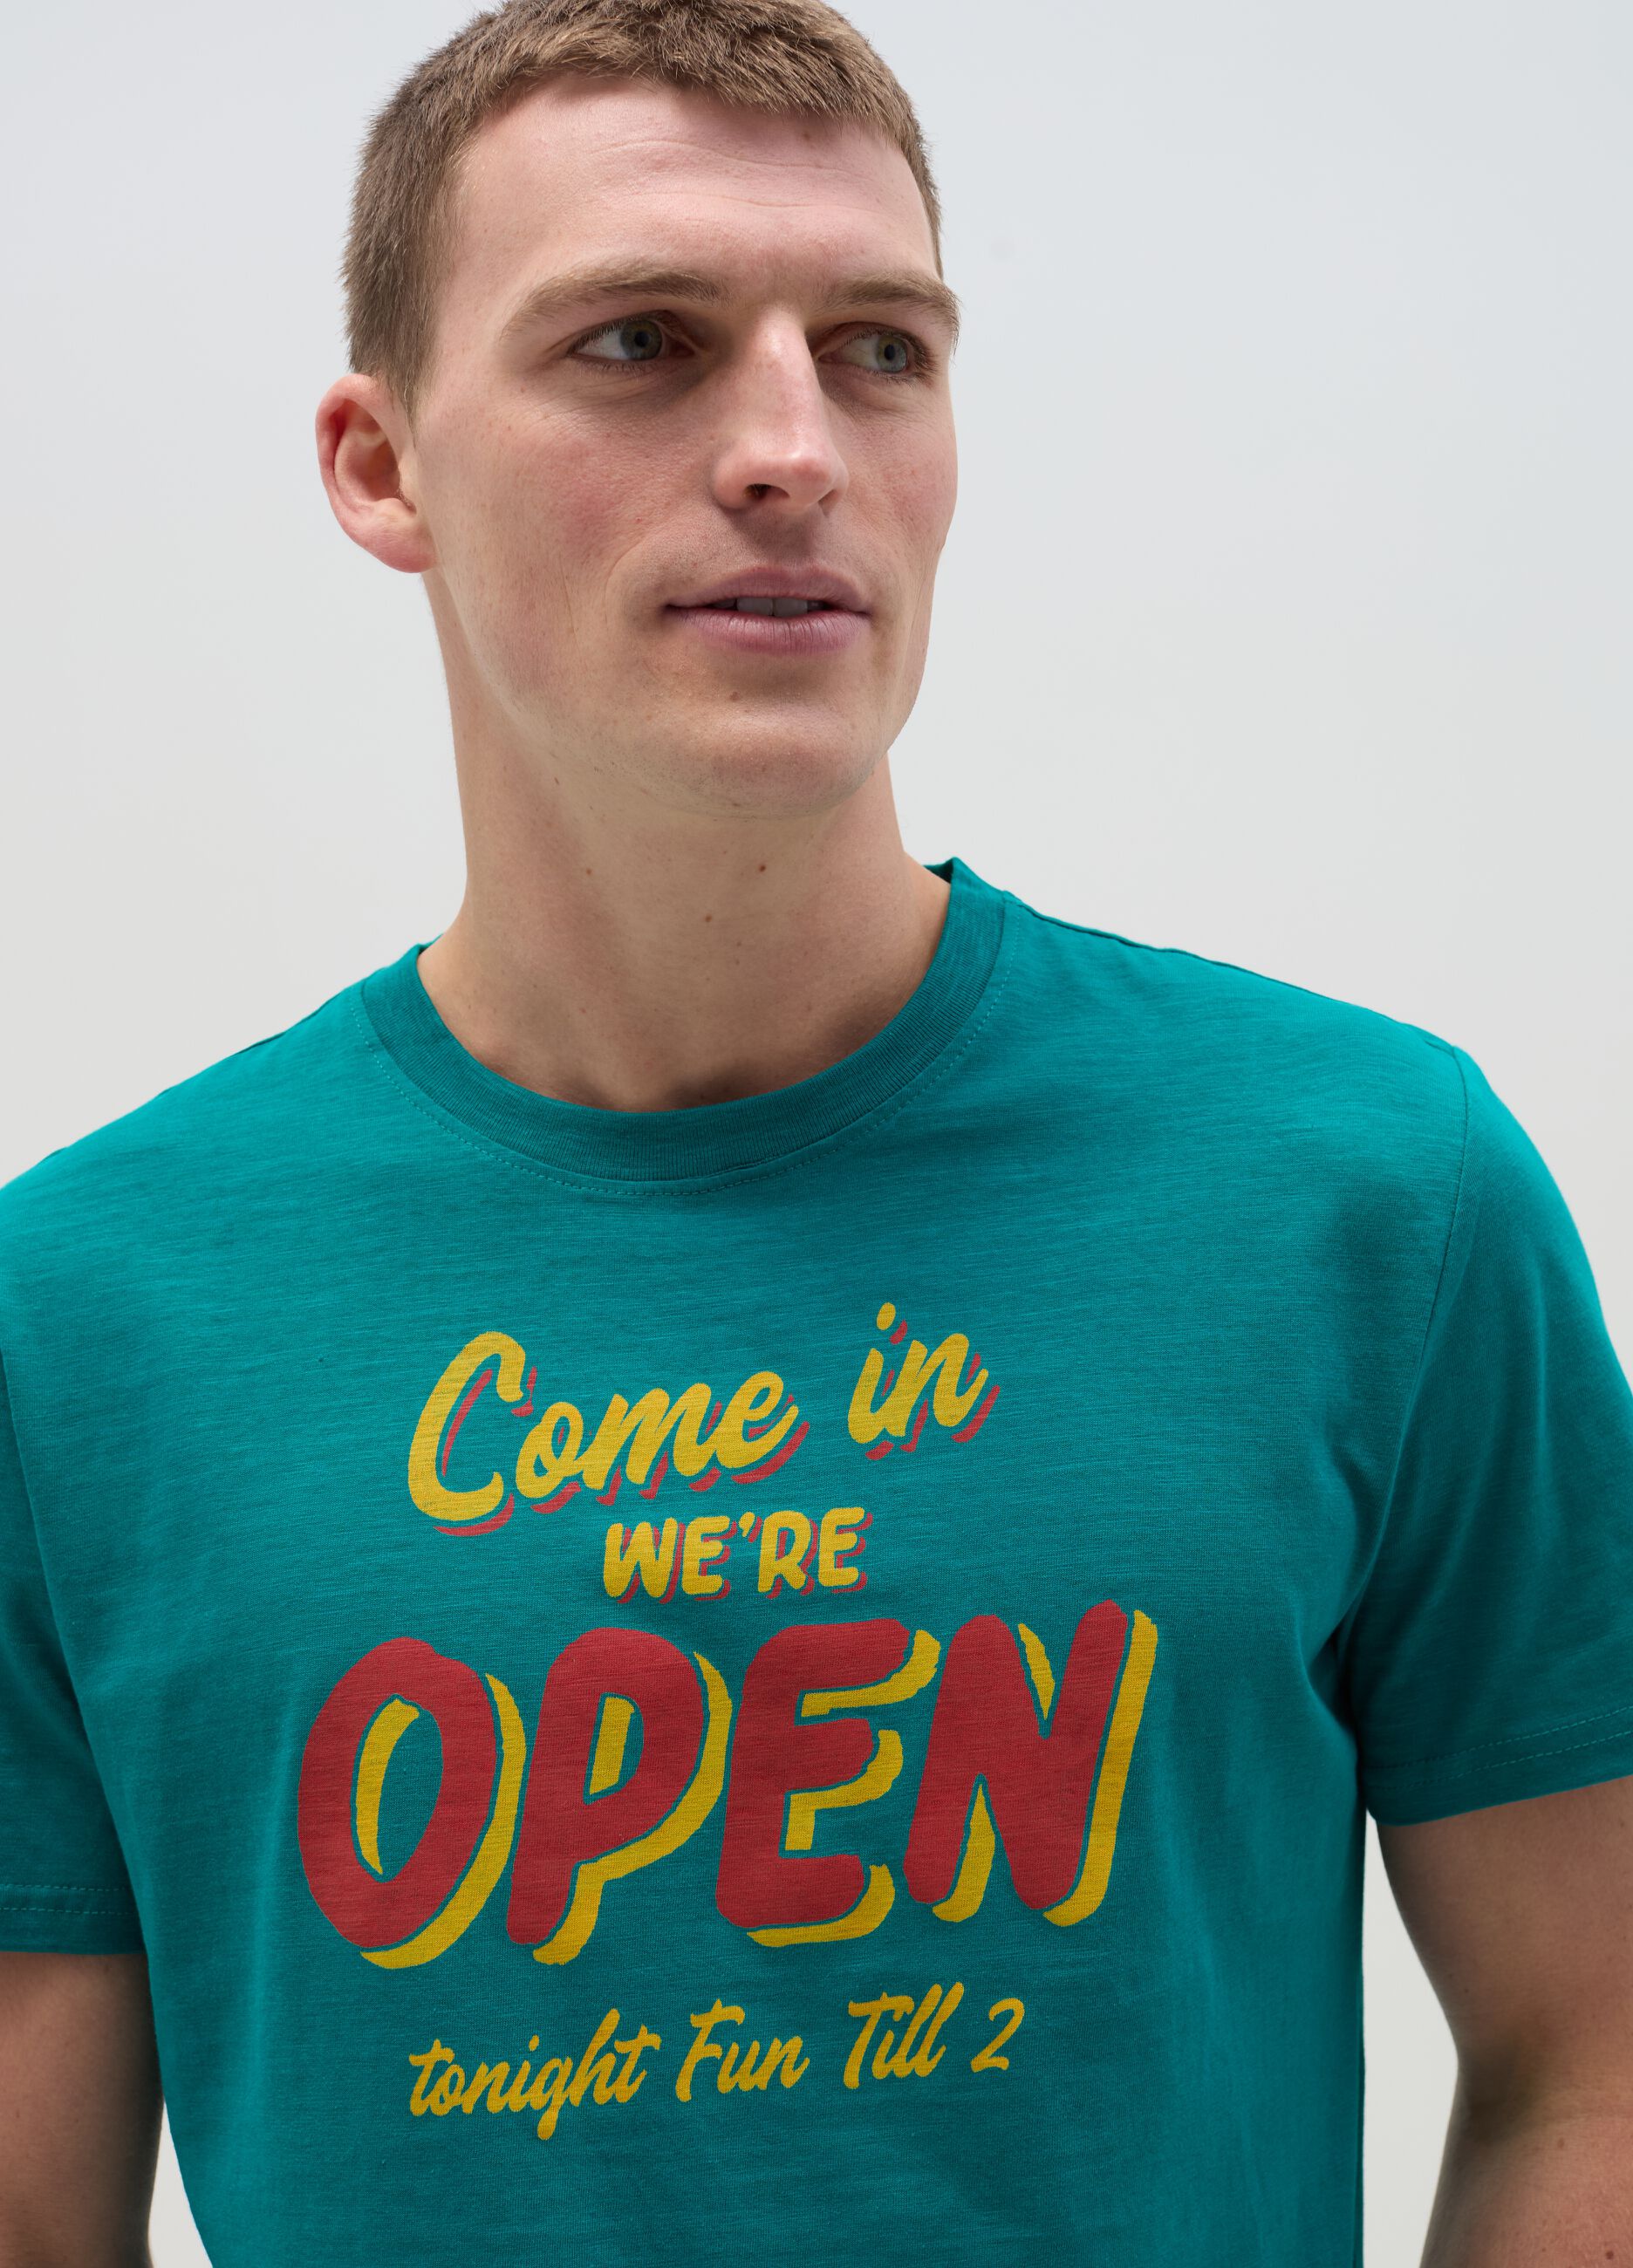 Cotton T-shirt with lettering print